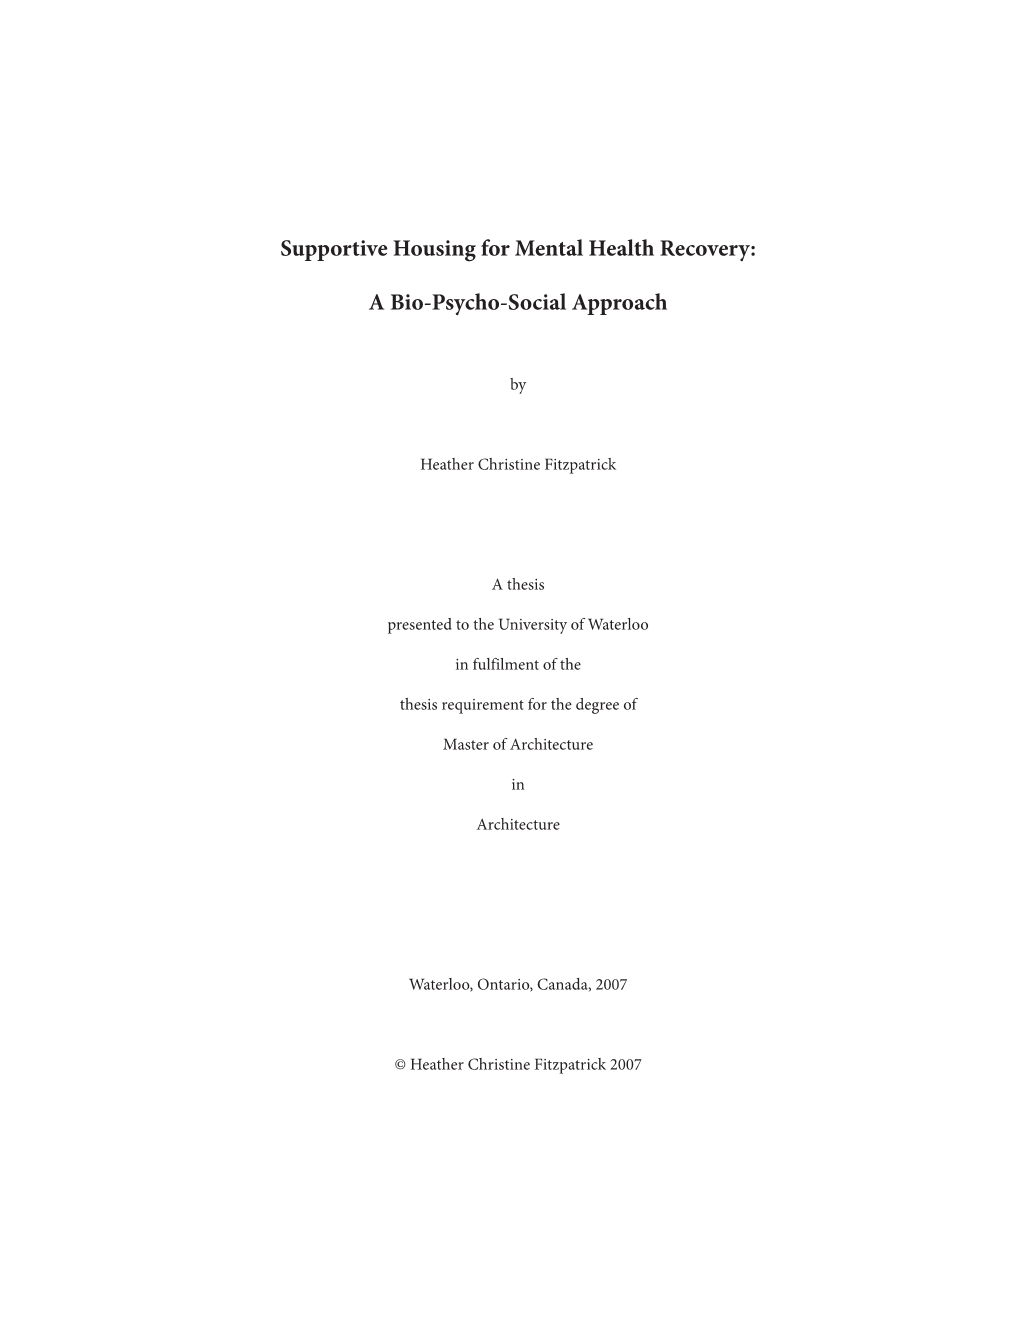 Supportive Housing for Mental Health Recovery: a Bio-Psycho-Social Approach